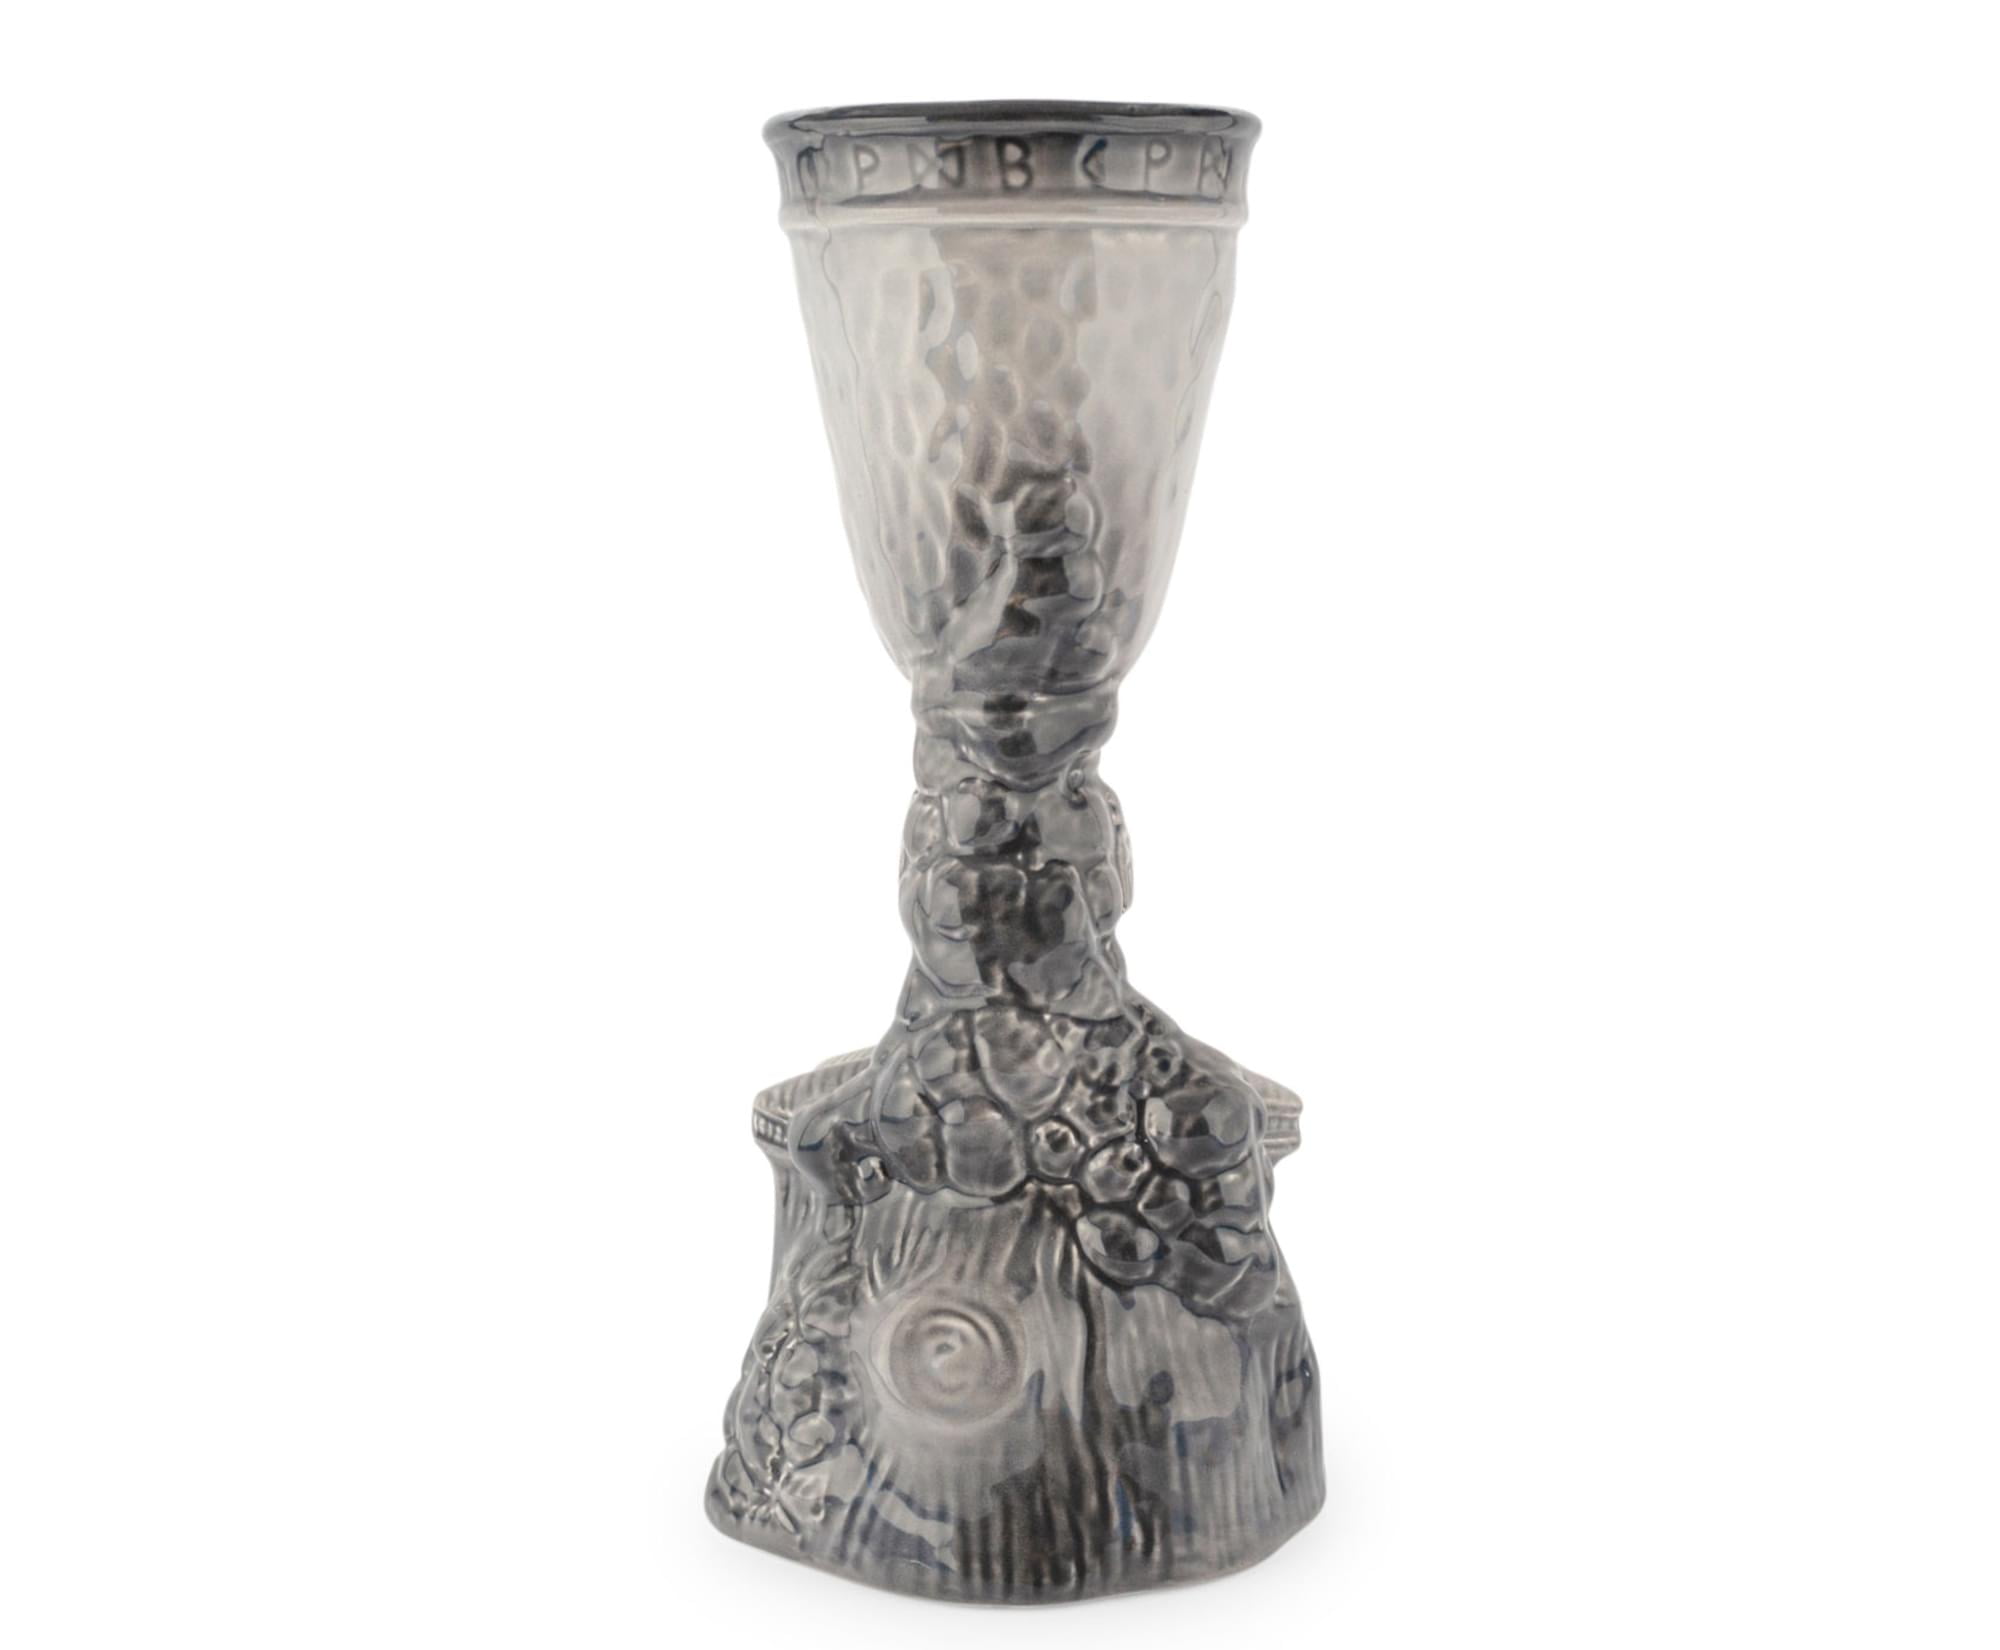 Asdomo Vintage Skull Glass Cup,With Built-In Straw,200ml/6.7oz